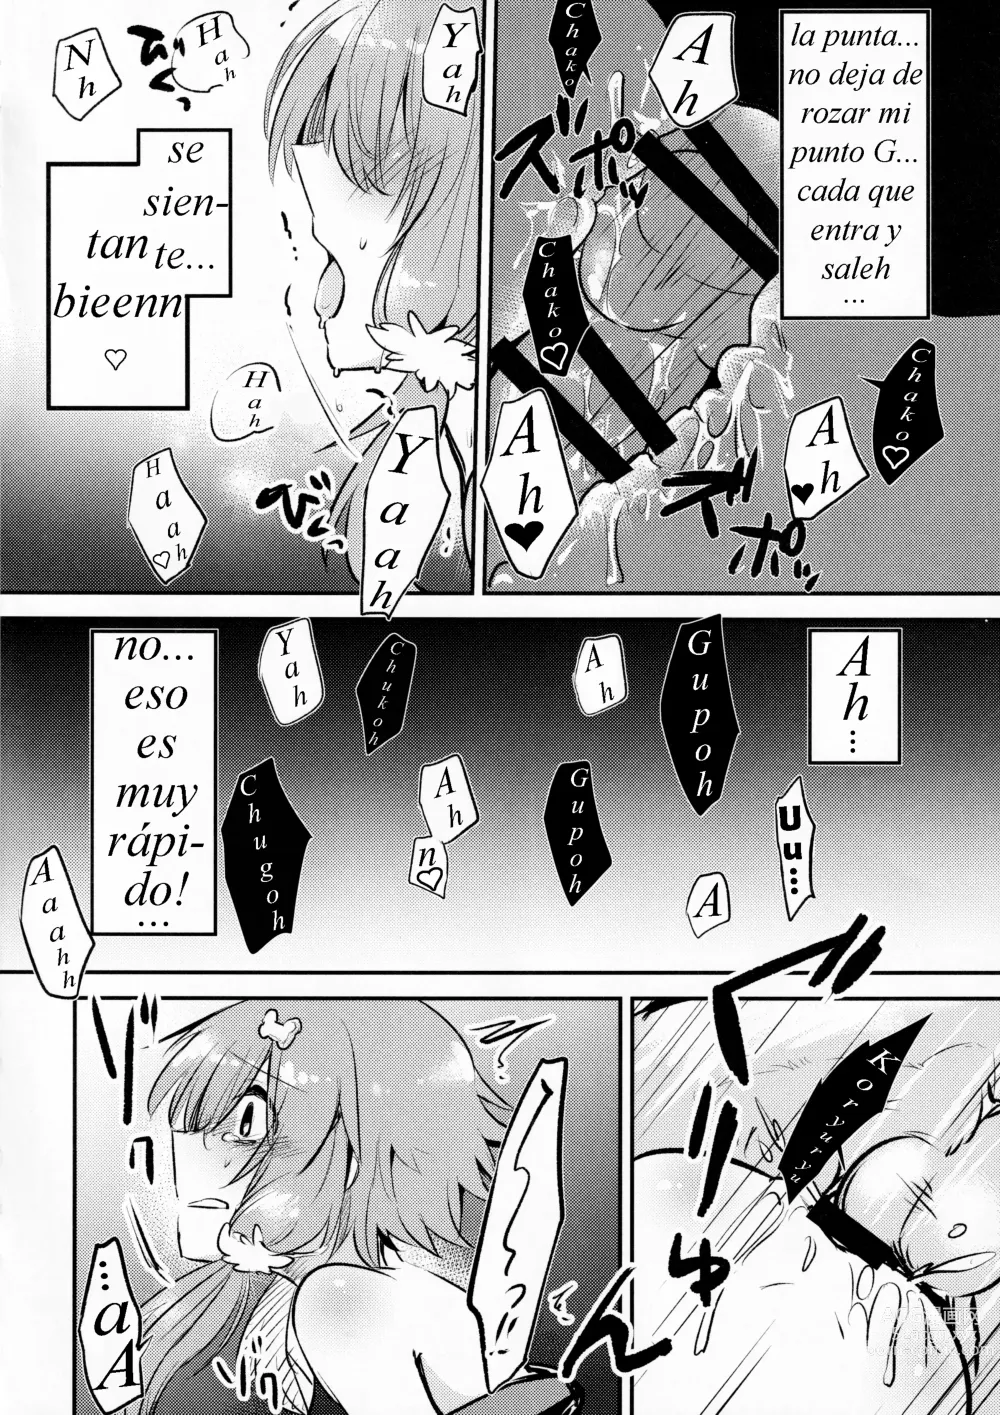 Page 15 of doujinshi *Yuka*² Channel Live streaming